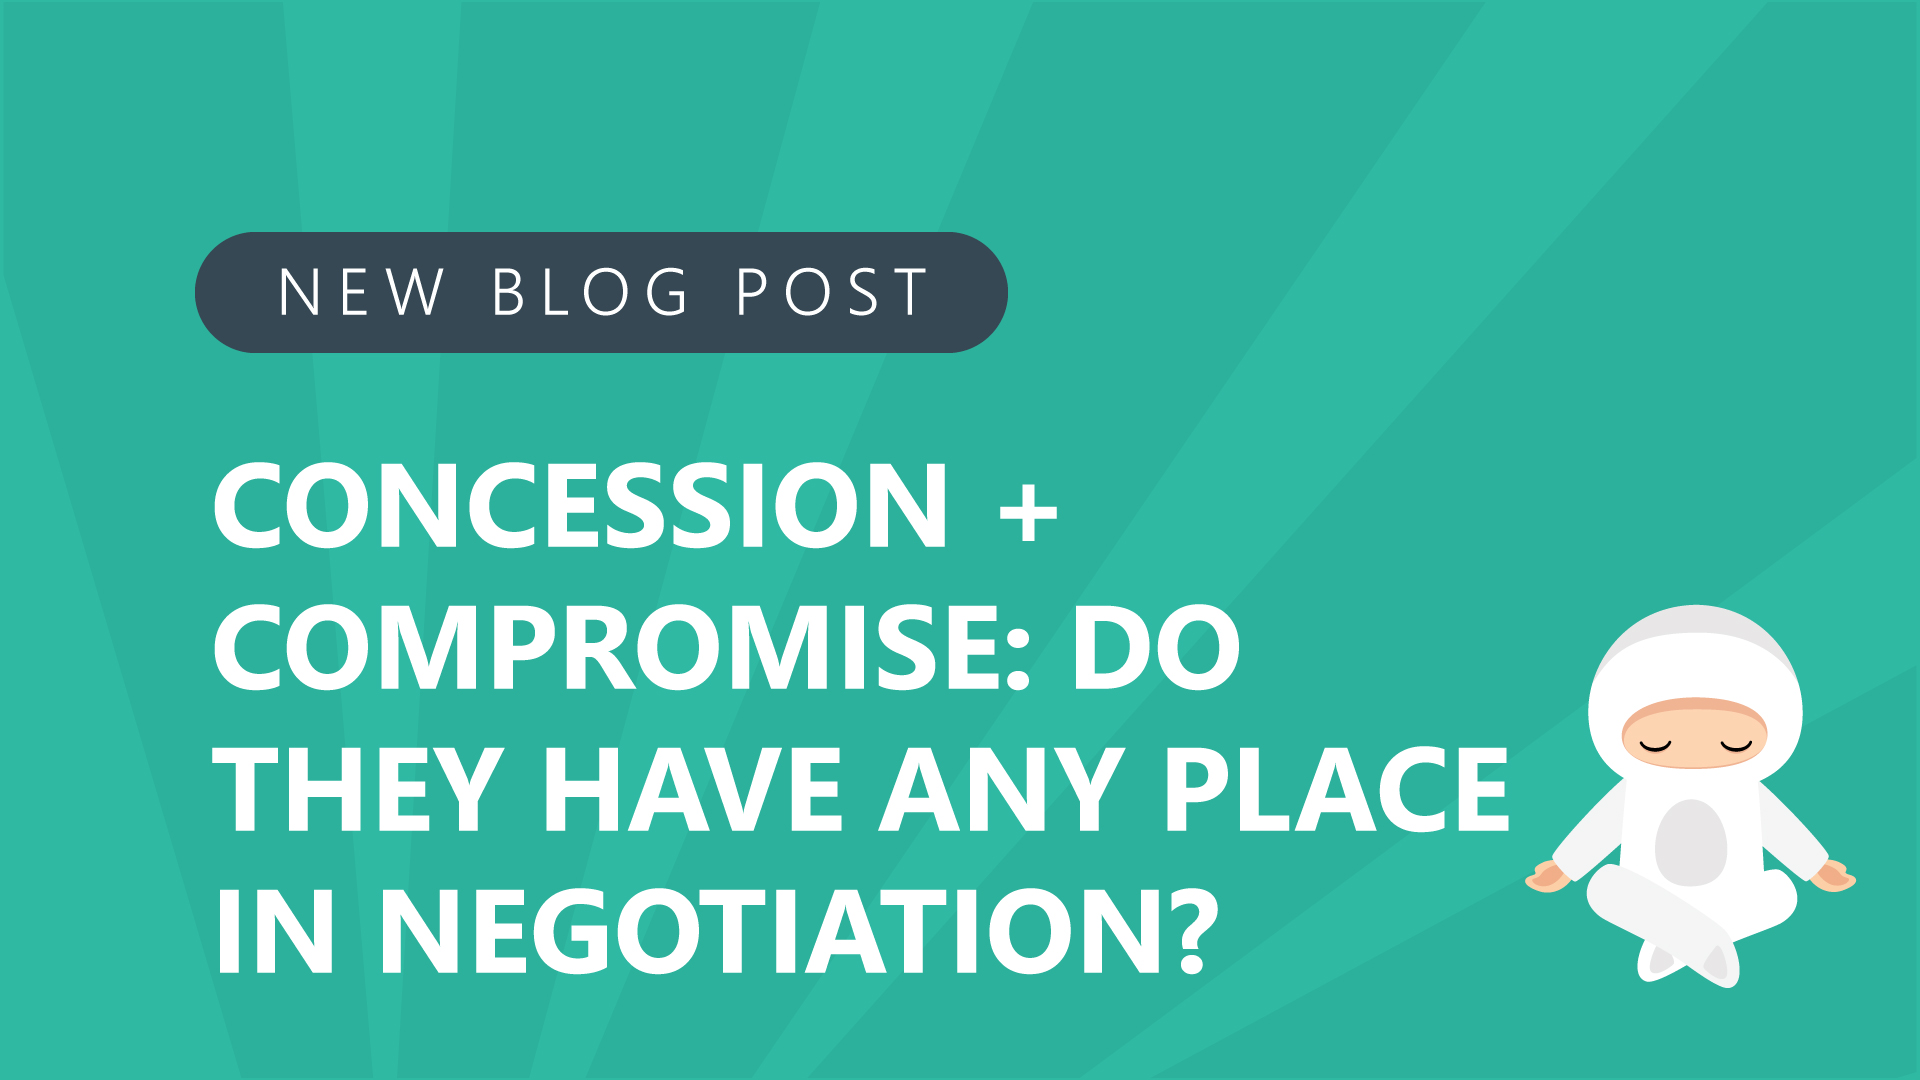 33-Concession-Compromise-Do-They-Have-Any-Place-in-Negotiation.jpg